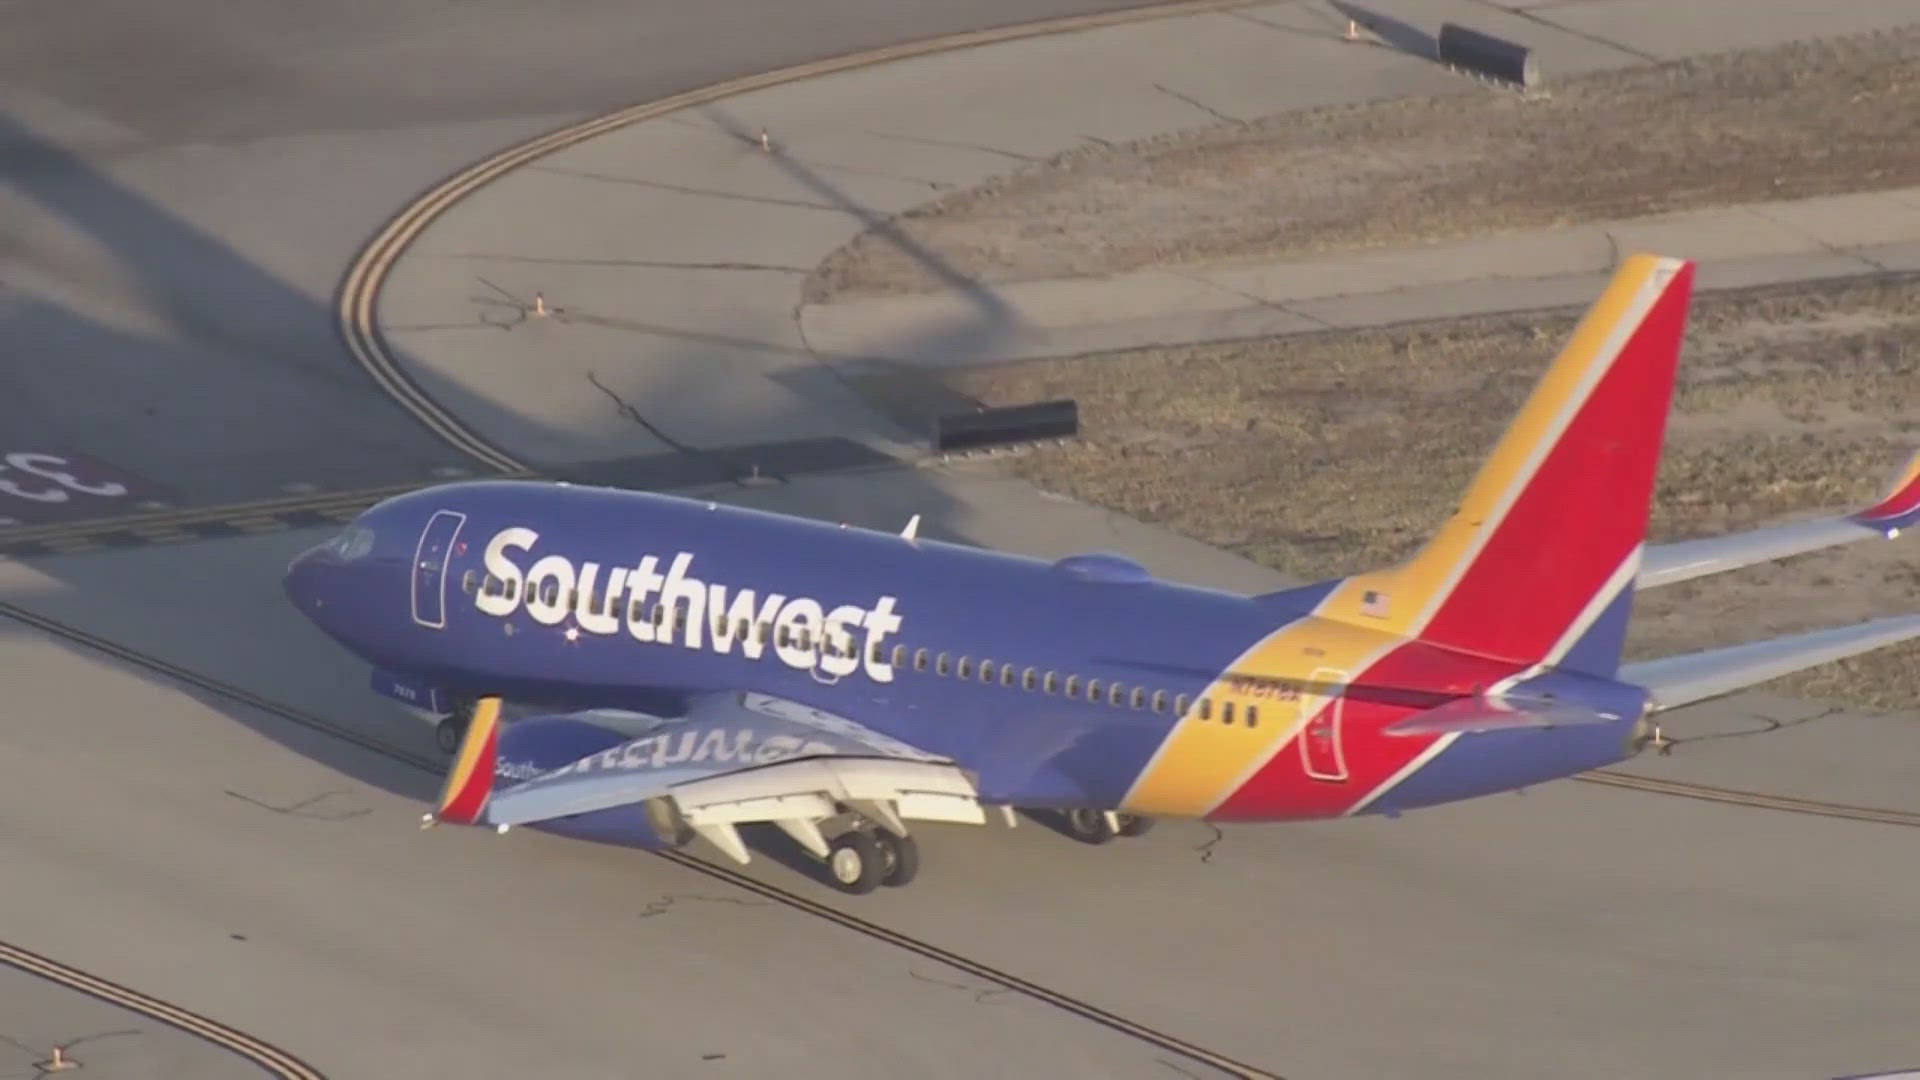 Southwest Airlines also announced it would begin offering redeye flights for the first time.